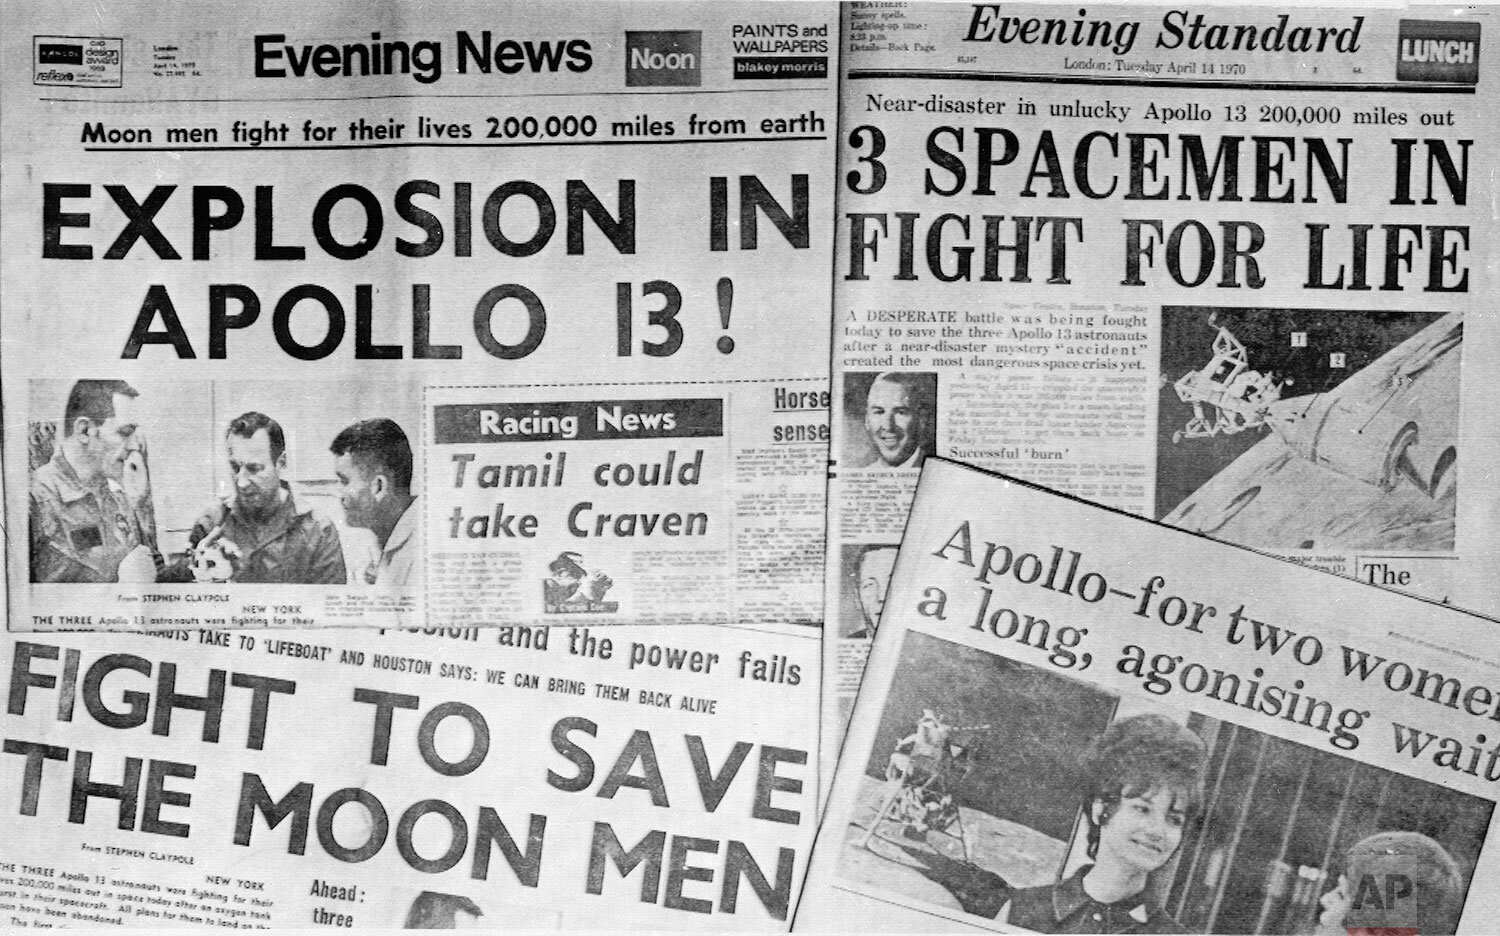  London evening newspaper headlines report the Apollo 13 troubles, outlining the battle to bring the astronauts and their crippled spaceship back to Earth from a quarter million miles away. London, April 14, 1970. (AP Photo/Eddie Worth) 